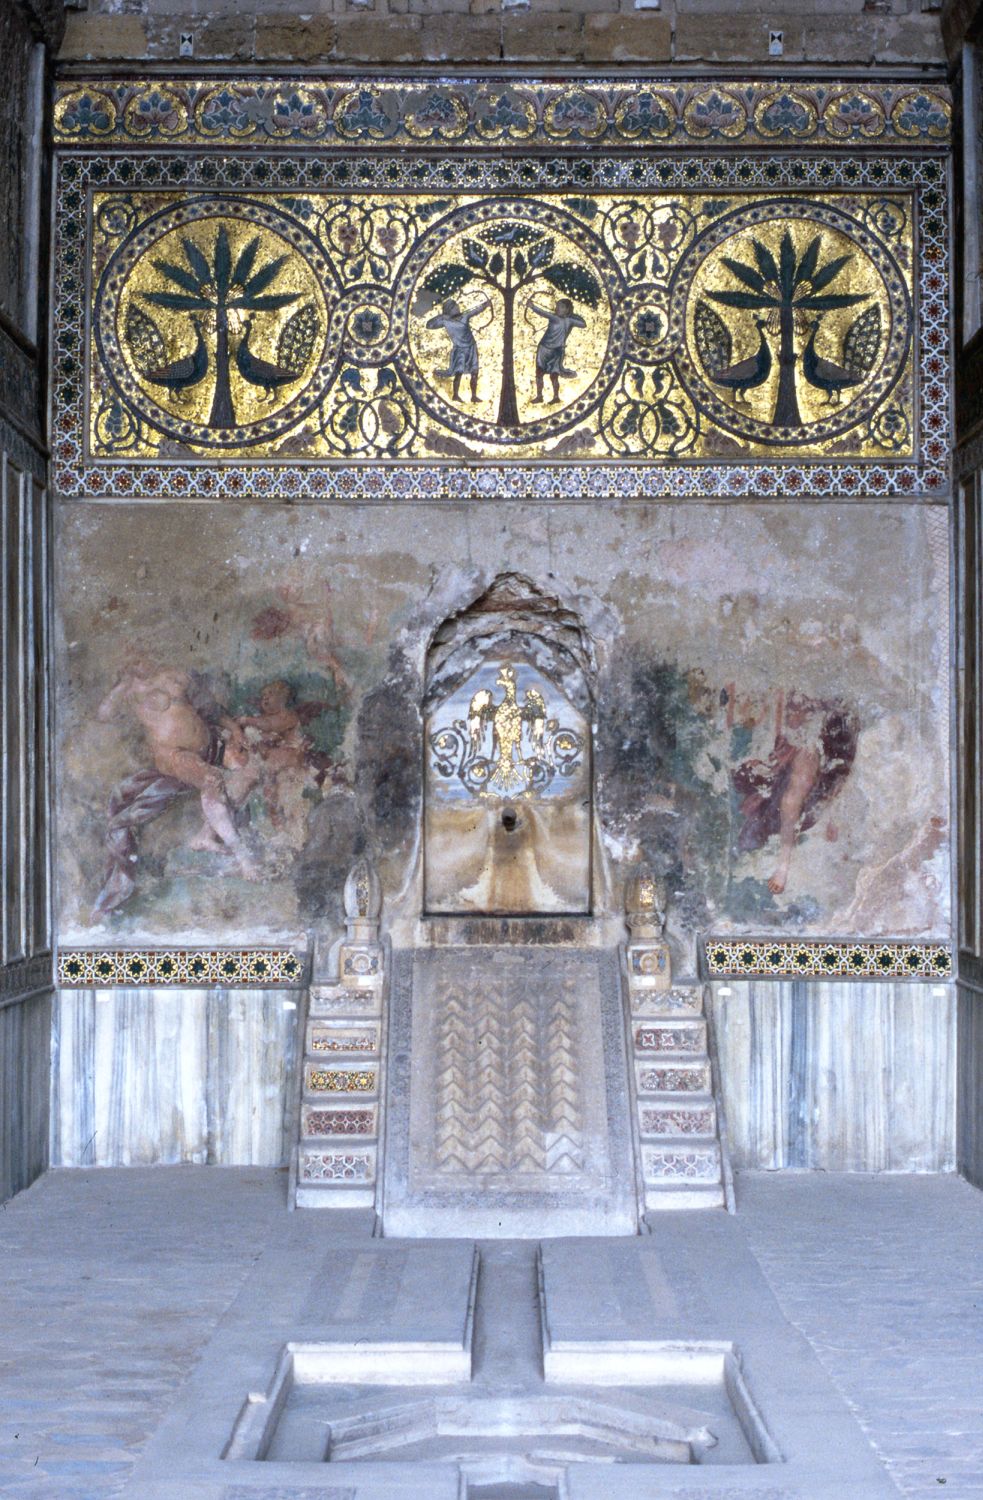 View of fountain and mosaics.